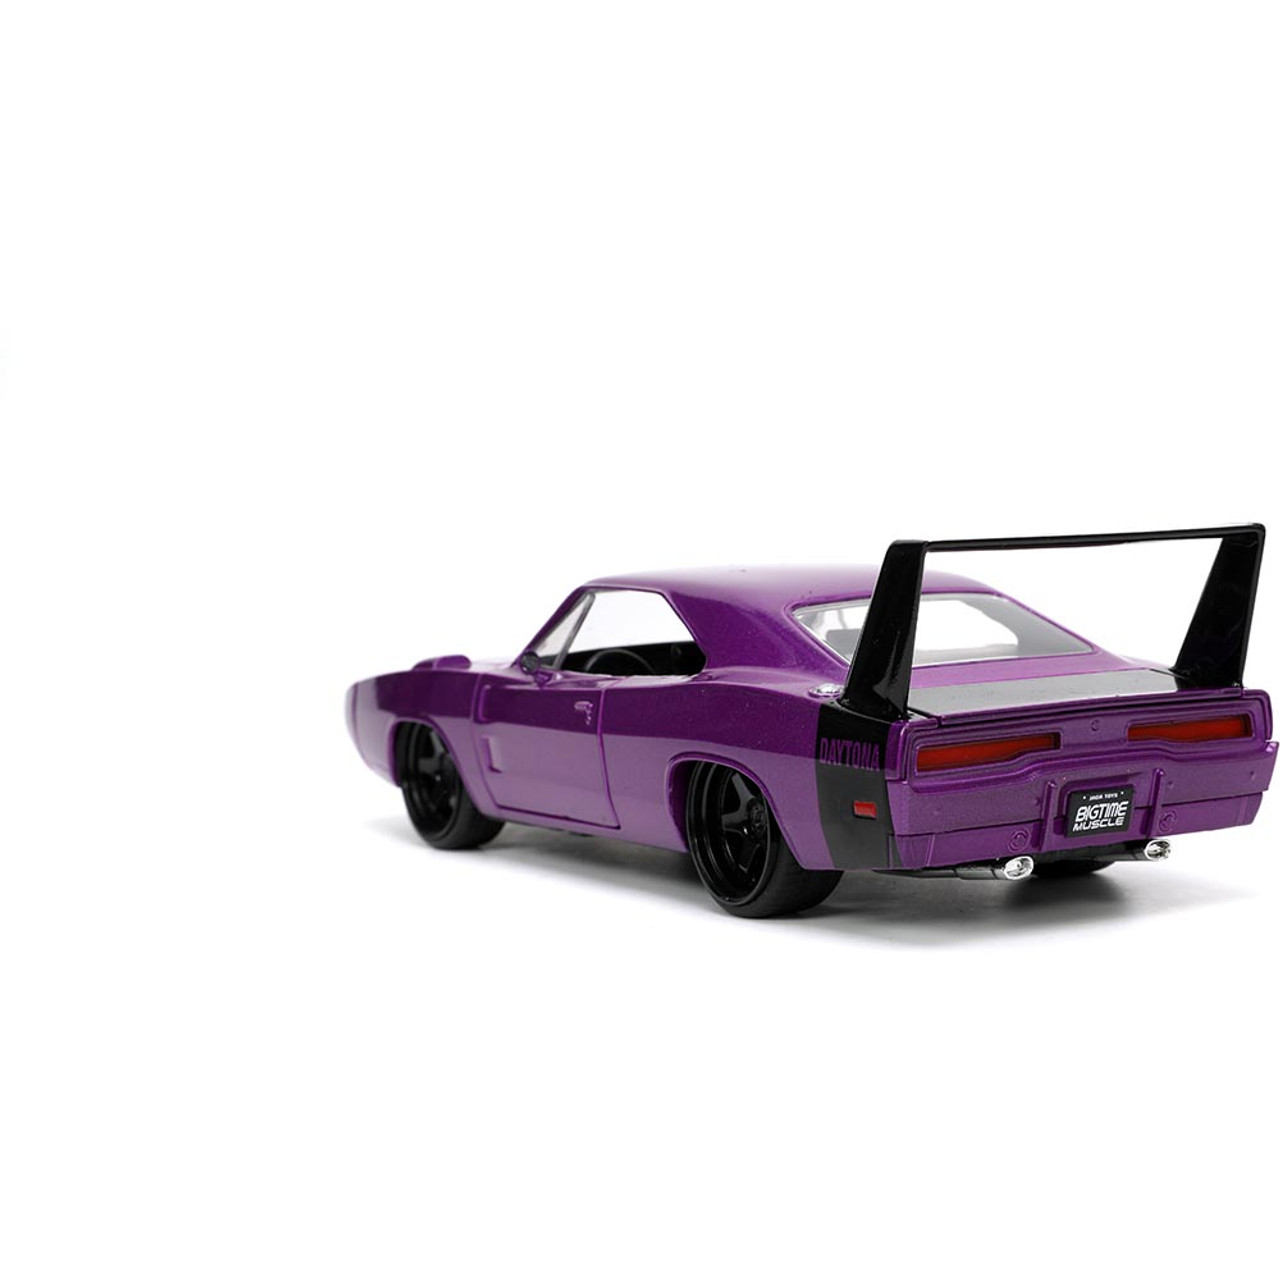 1969 Dodge Charger Daytona - BTM 1:24 Scale Diecast Model by Jada Toys |  Fairfield Collectibles - The #1 Source For High Quality Diecast Scale Model  Cars